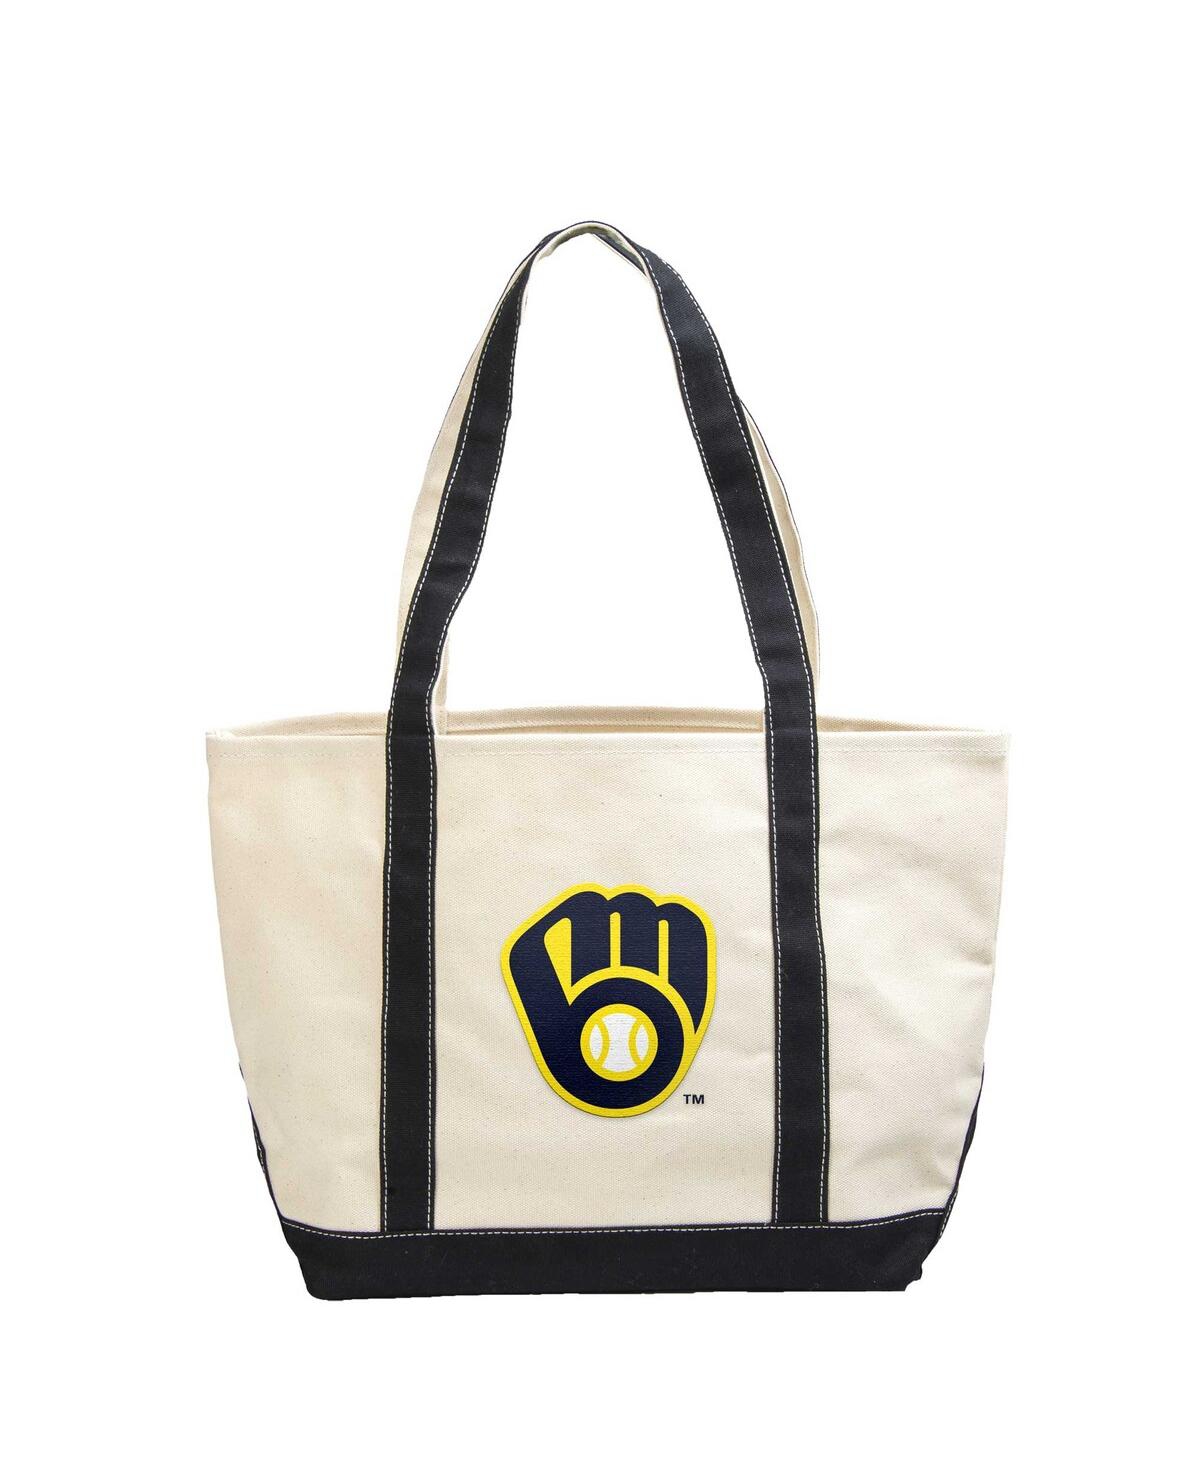 Men's and Women's Milwaukee Brewers Canvas Tote Bag - Navy